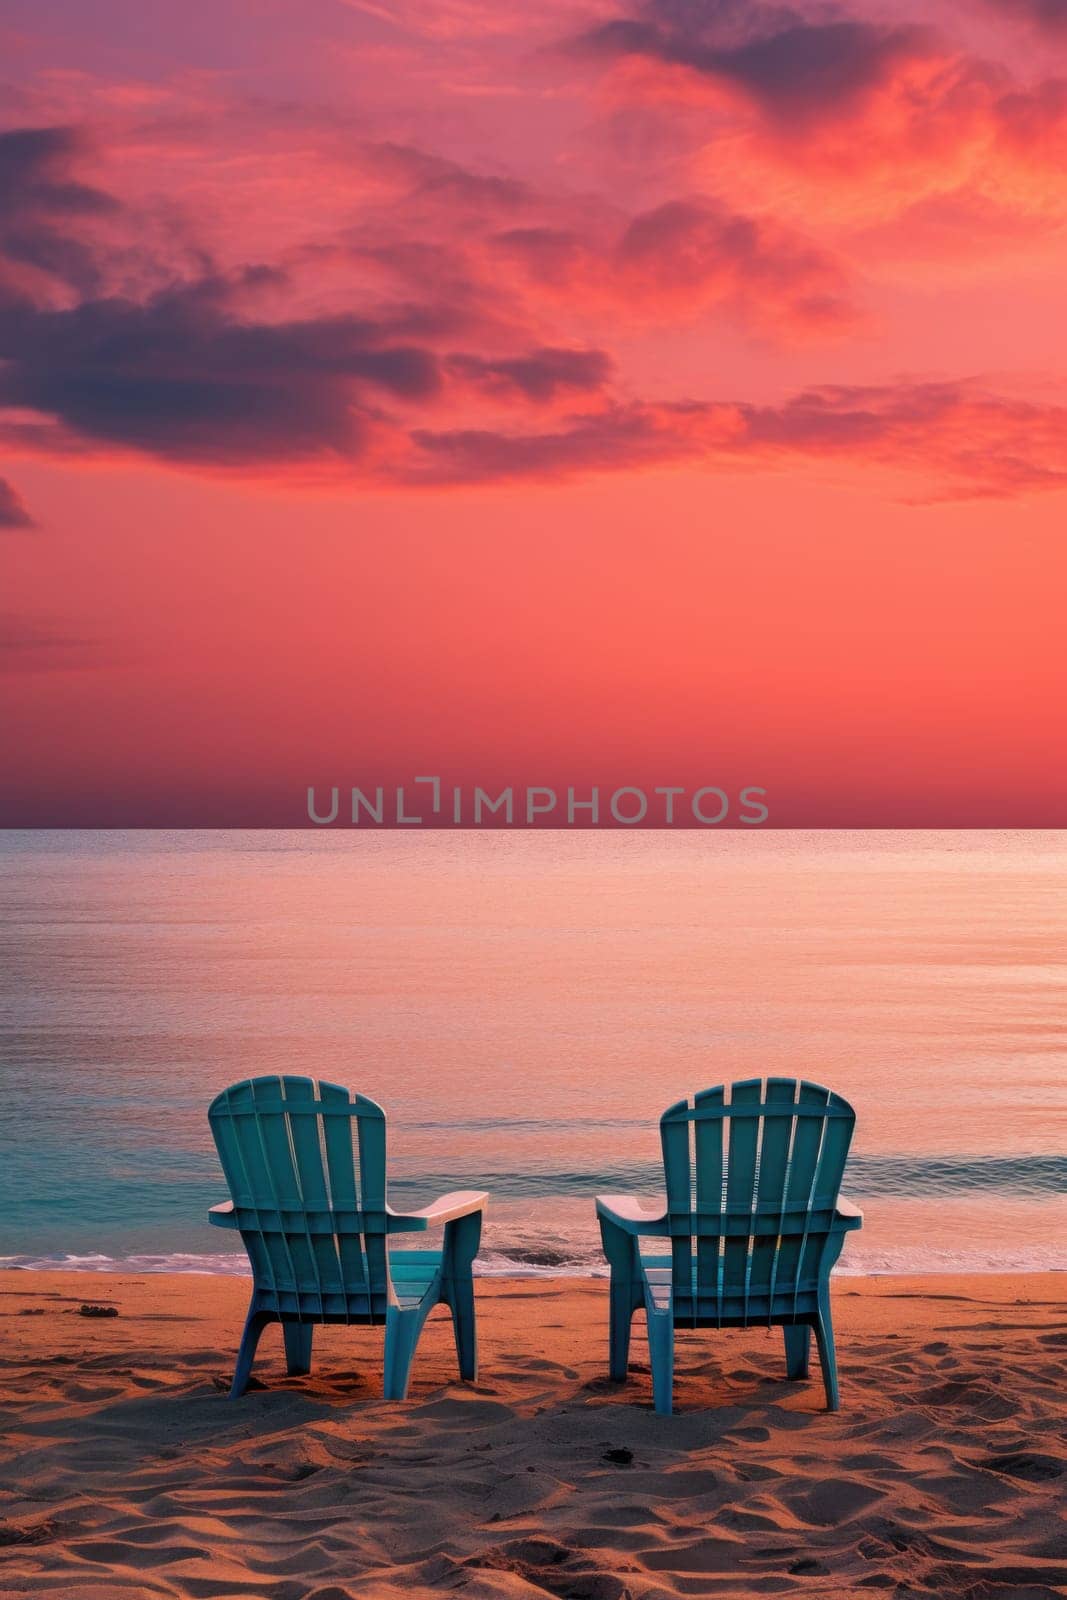 Two chairs on the beach at sunset with a beautiful view